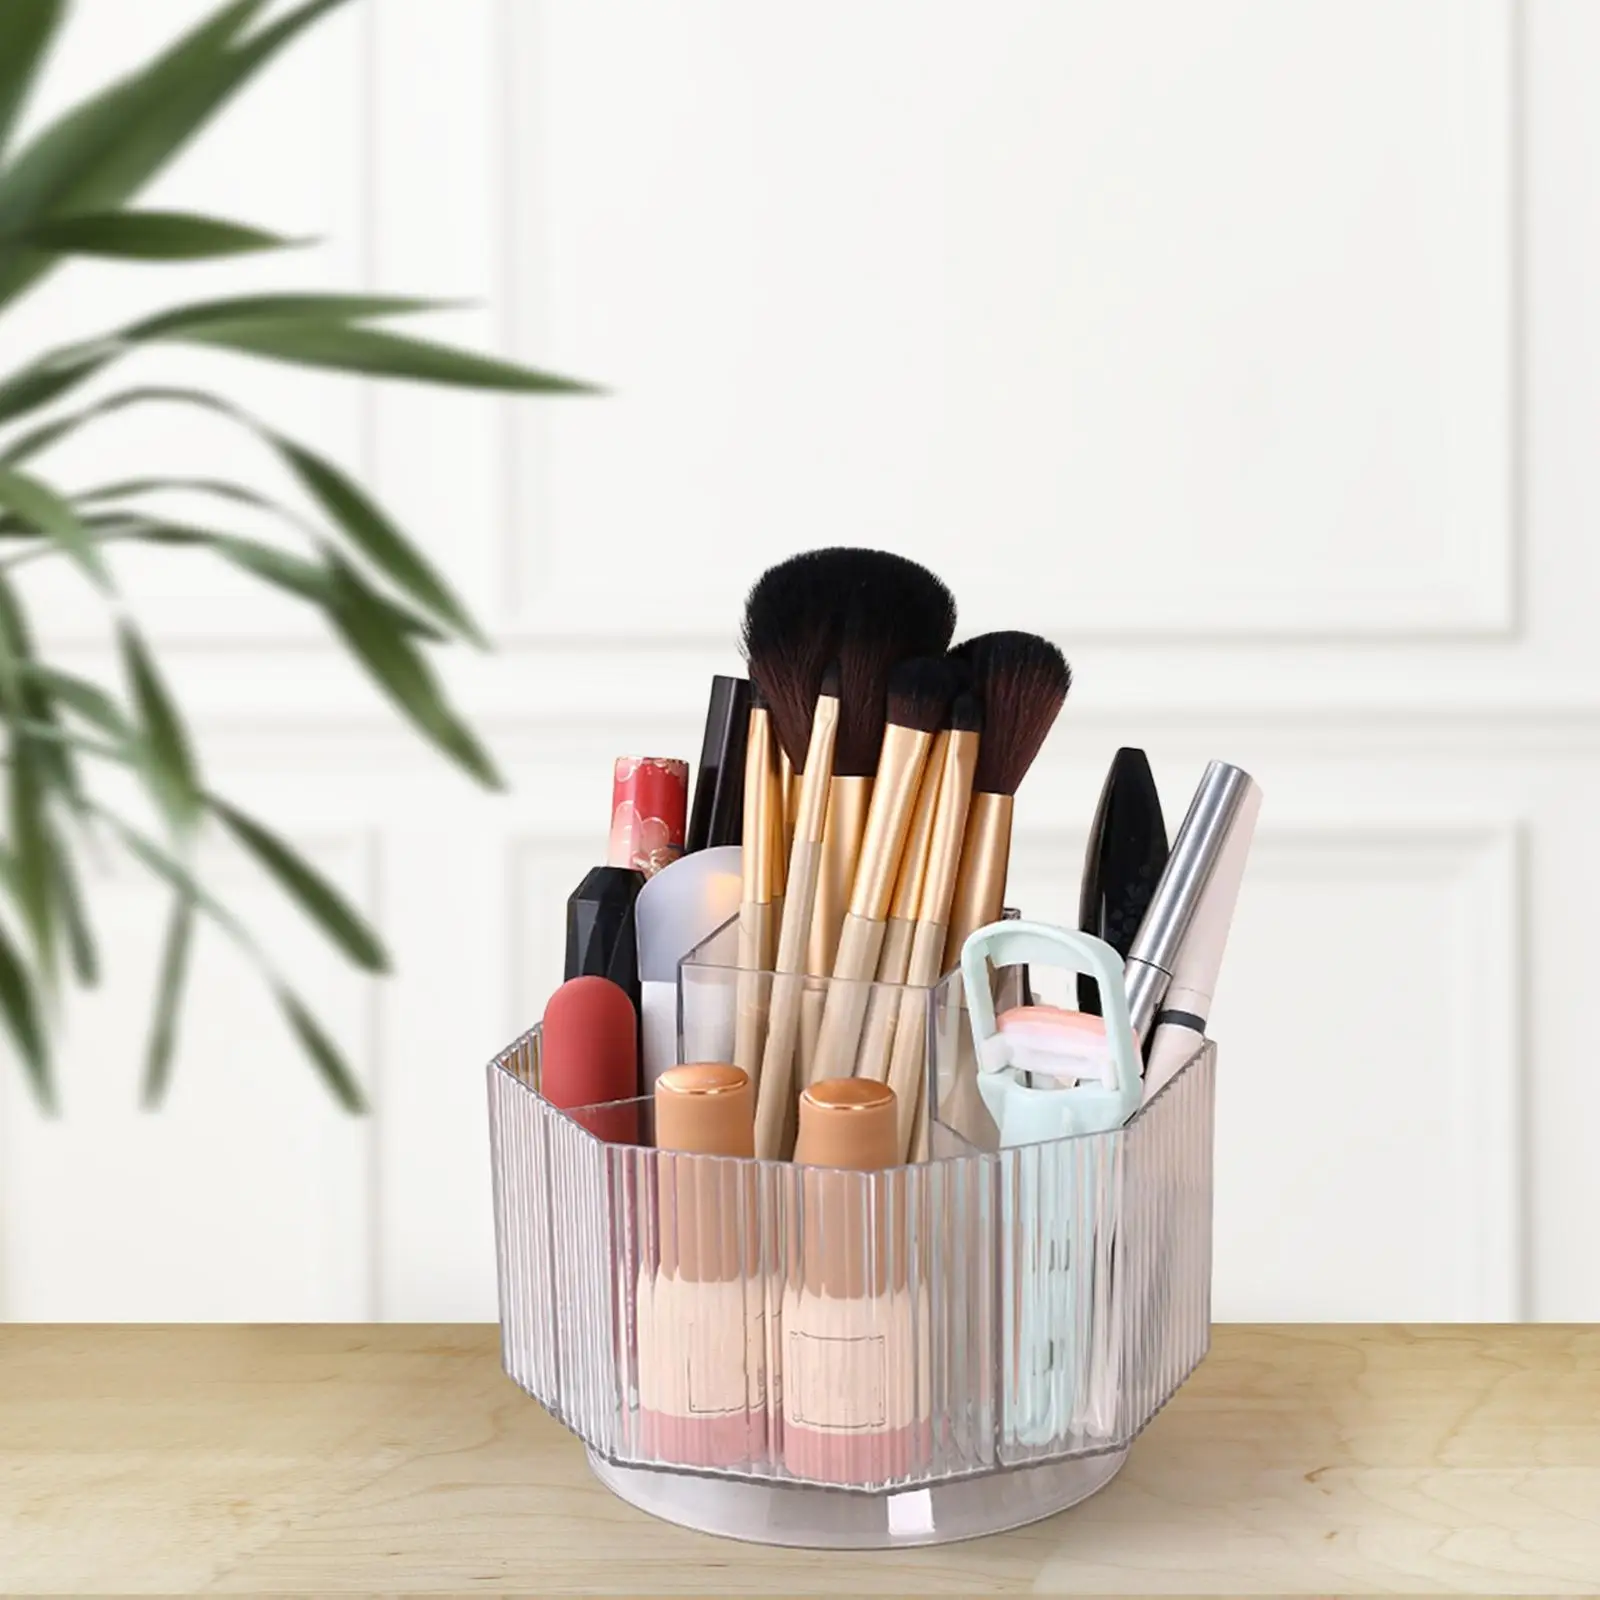 Countertop Rotation Cosmetic Brush Storage Box Organizer for Nail Polish, Jewelry Findings with 5 Grids Multifunctional